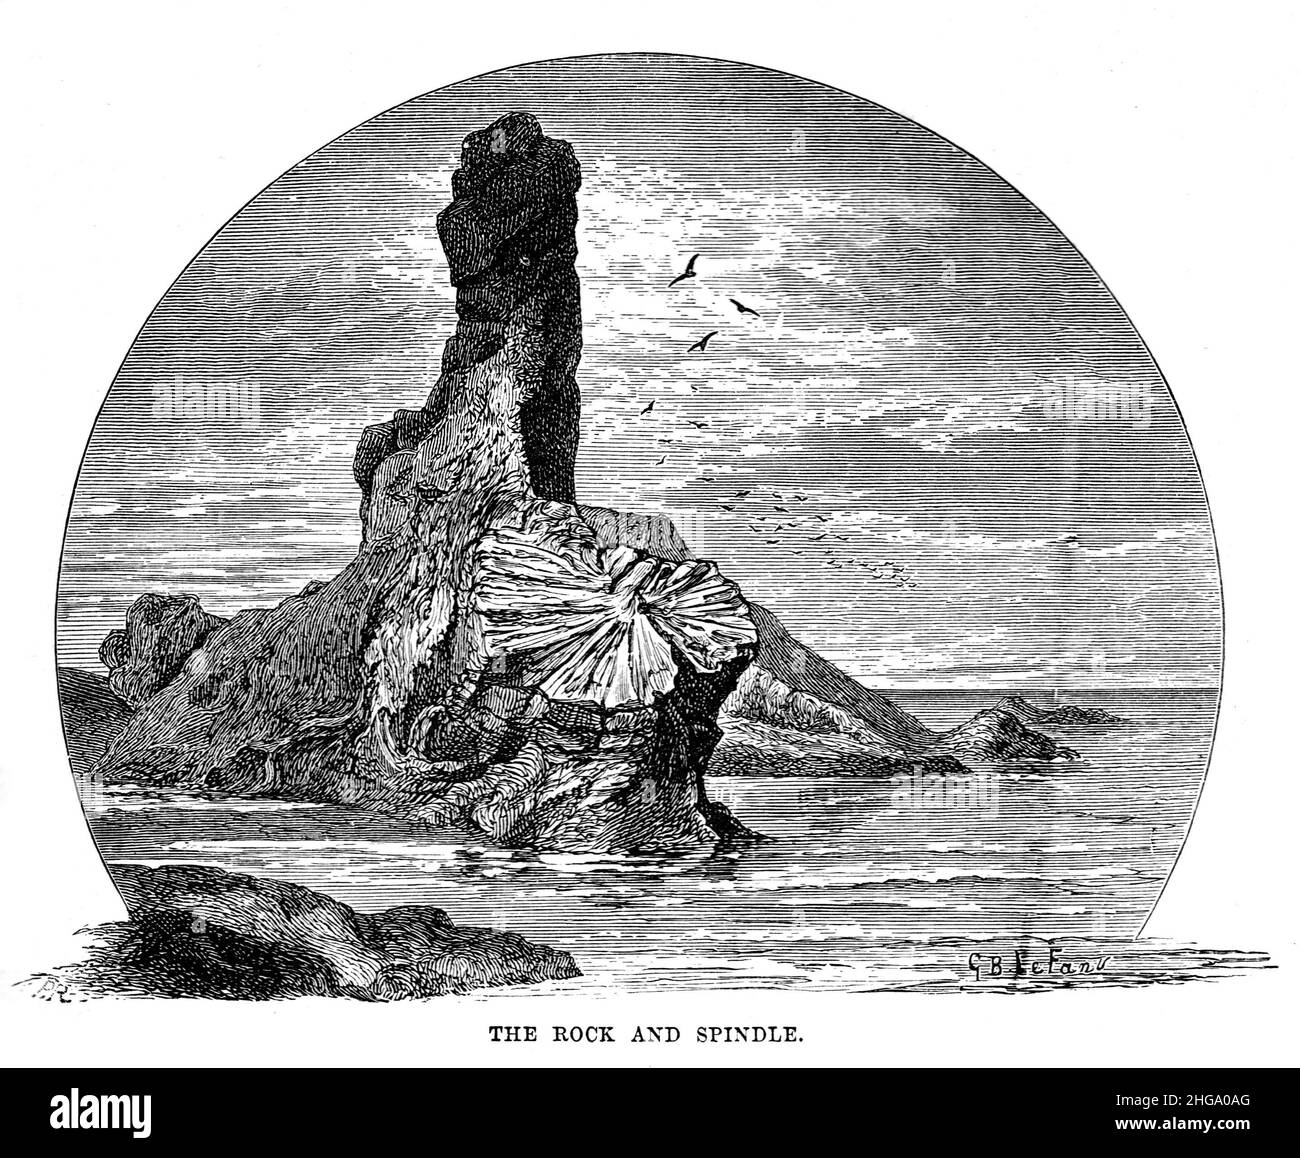 Black and White Illustration; The Rock and Spindle, a volcanic formation on the coast near St Andrew's Scotland, circa 1880 Stock Photo